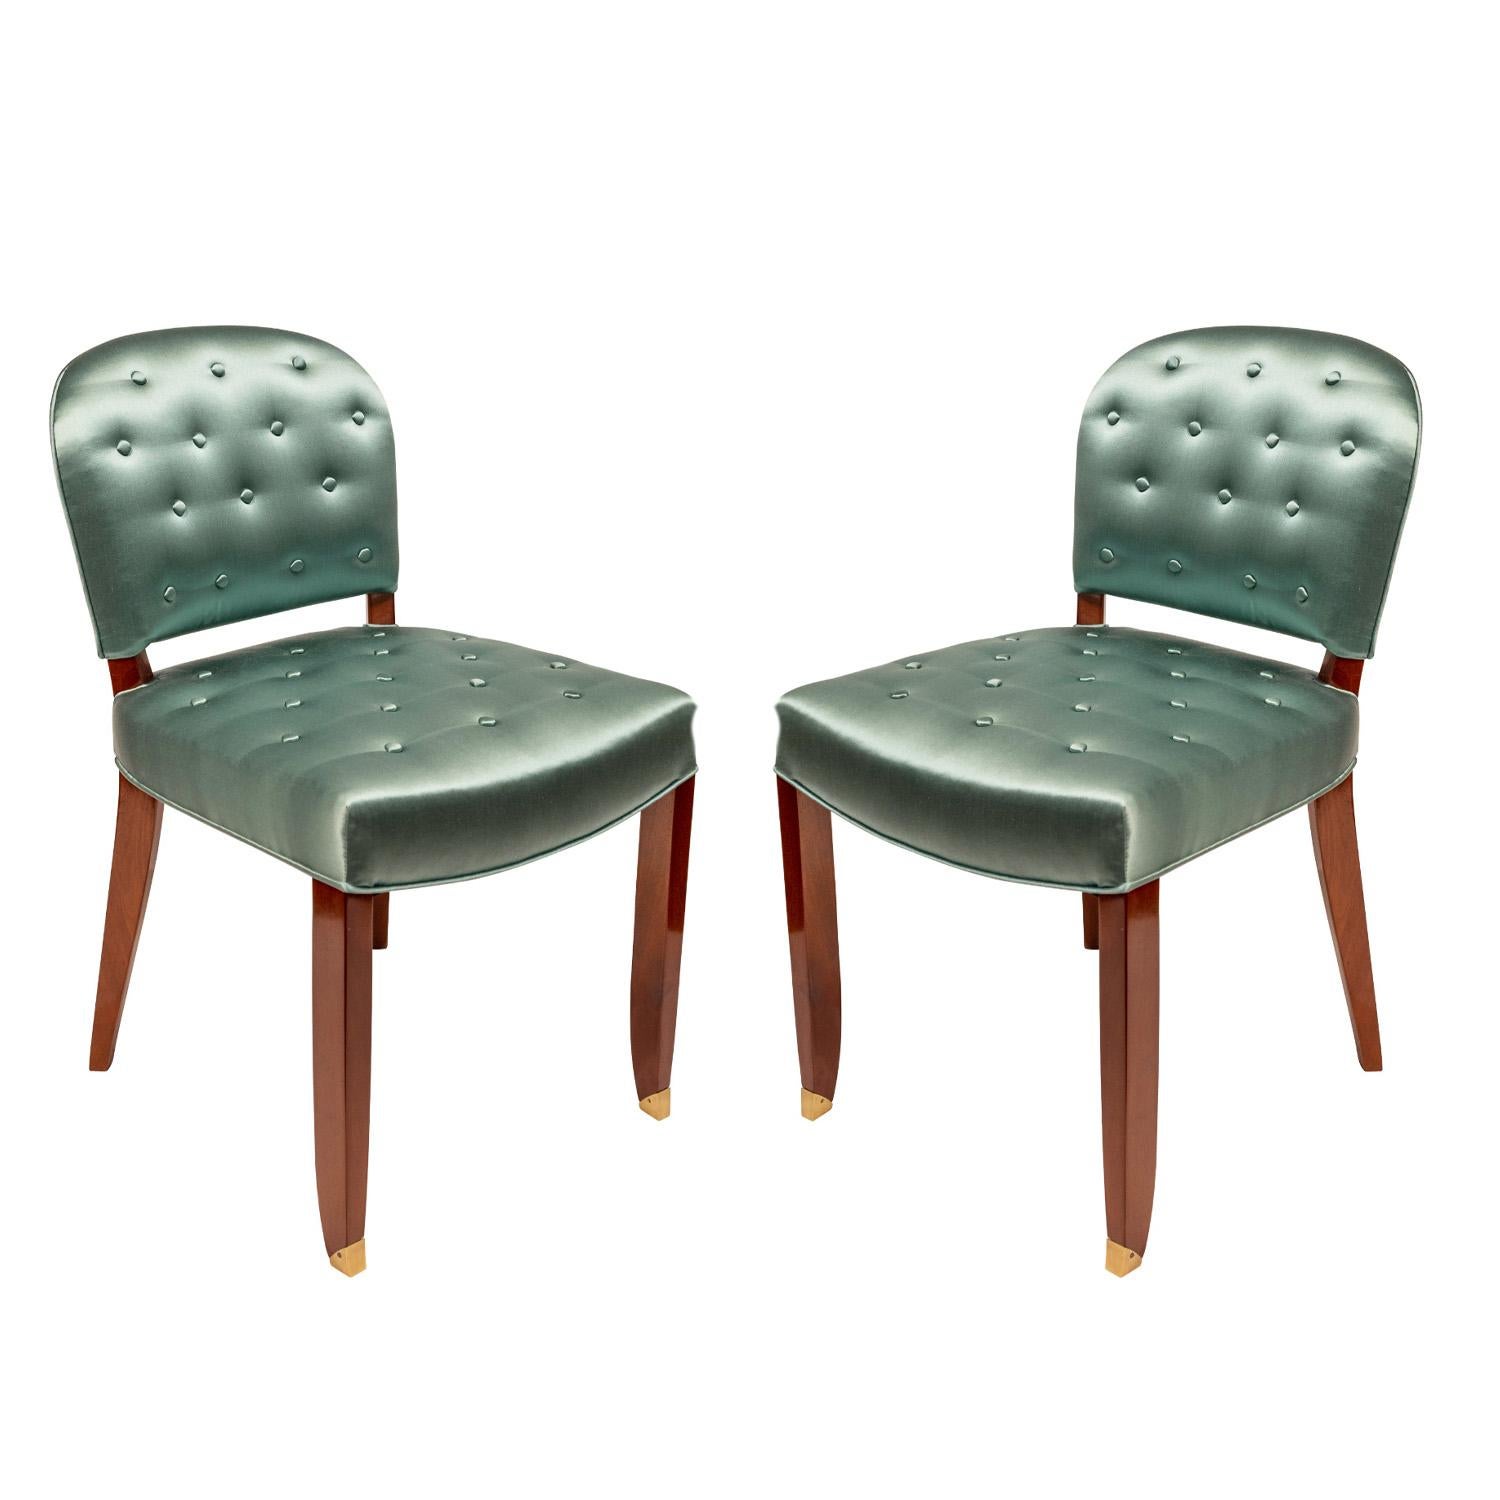 Pair of Art Deco side chairs in mahogany newly upholstered green sateen with brass sabots by Jules Leleu, France 1950's (numbered on upper legs “15467” and “15468”). These beautifully proportioned chairs are little jewels.

Reference:
The House